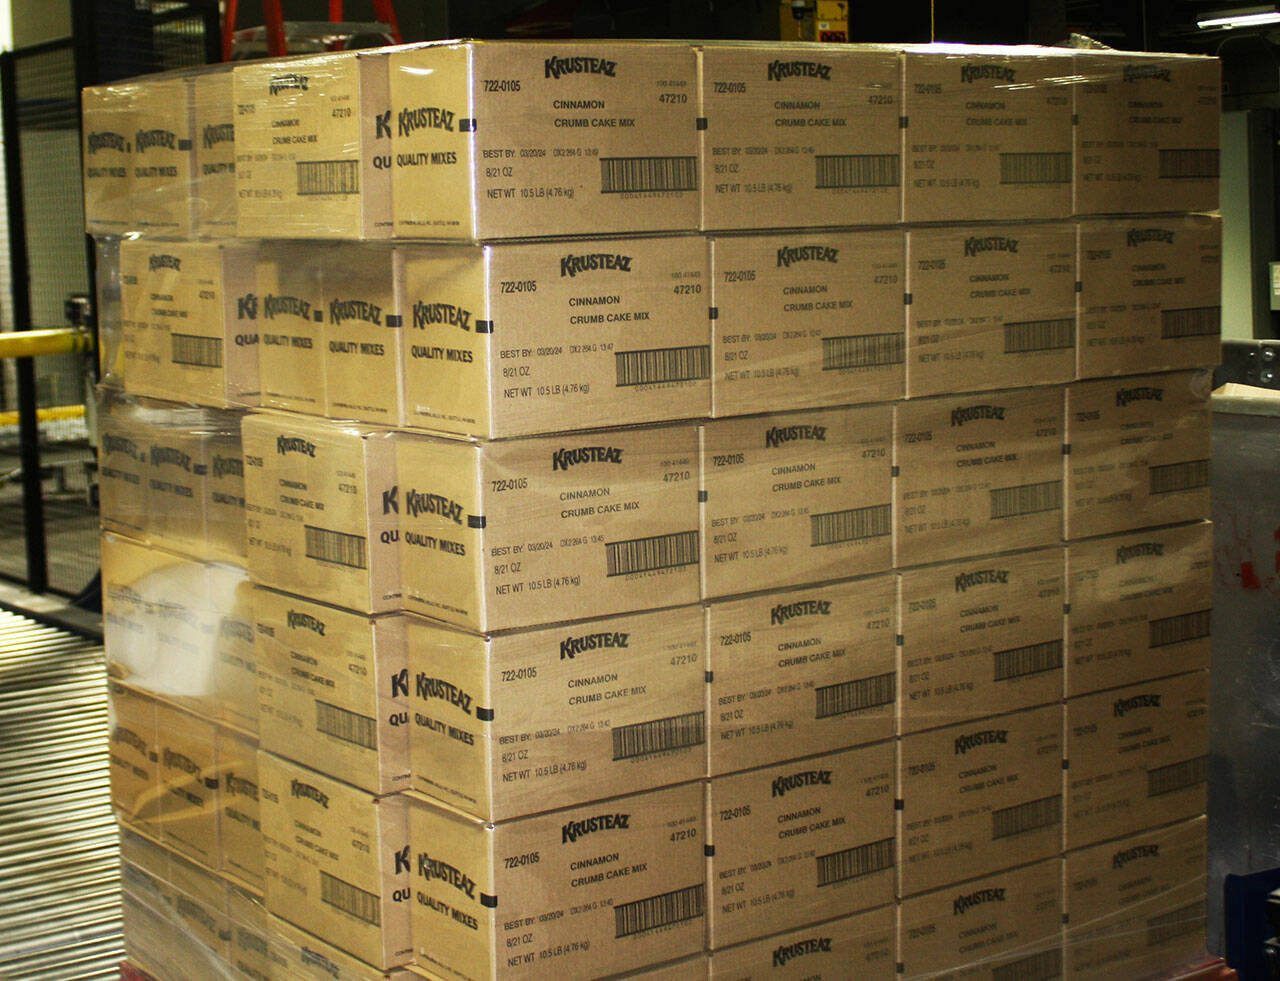 Boxes ready to be moved from Kent to The Krusteaz Company distribution center in Tukwila. STEVE HUNTER, Kent Reporter